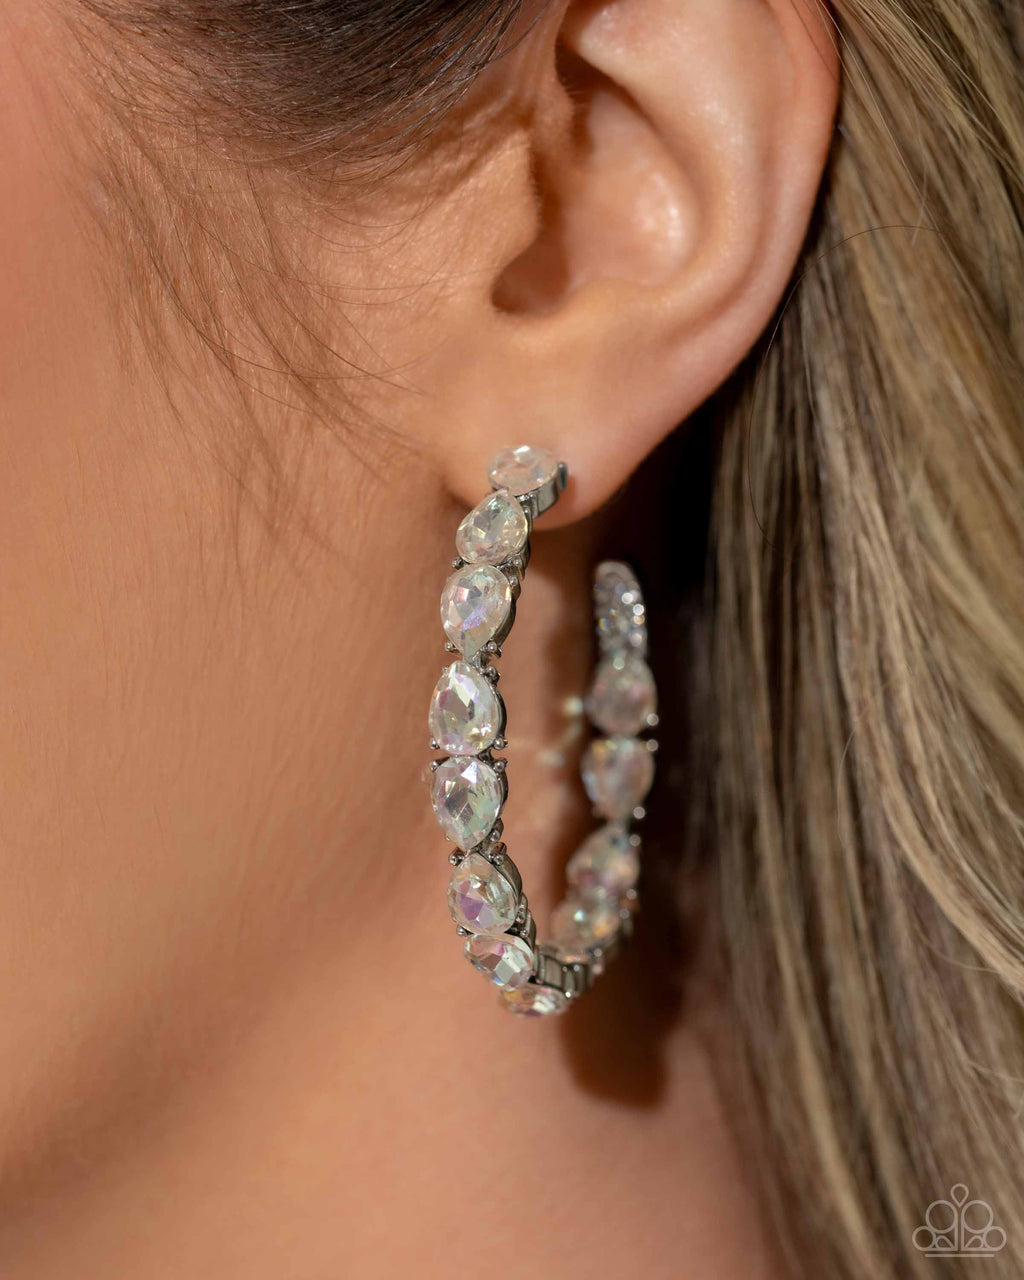 Presidential Pizzazz - White Earrings - Paparazzi Accessories